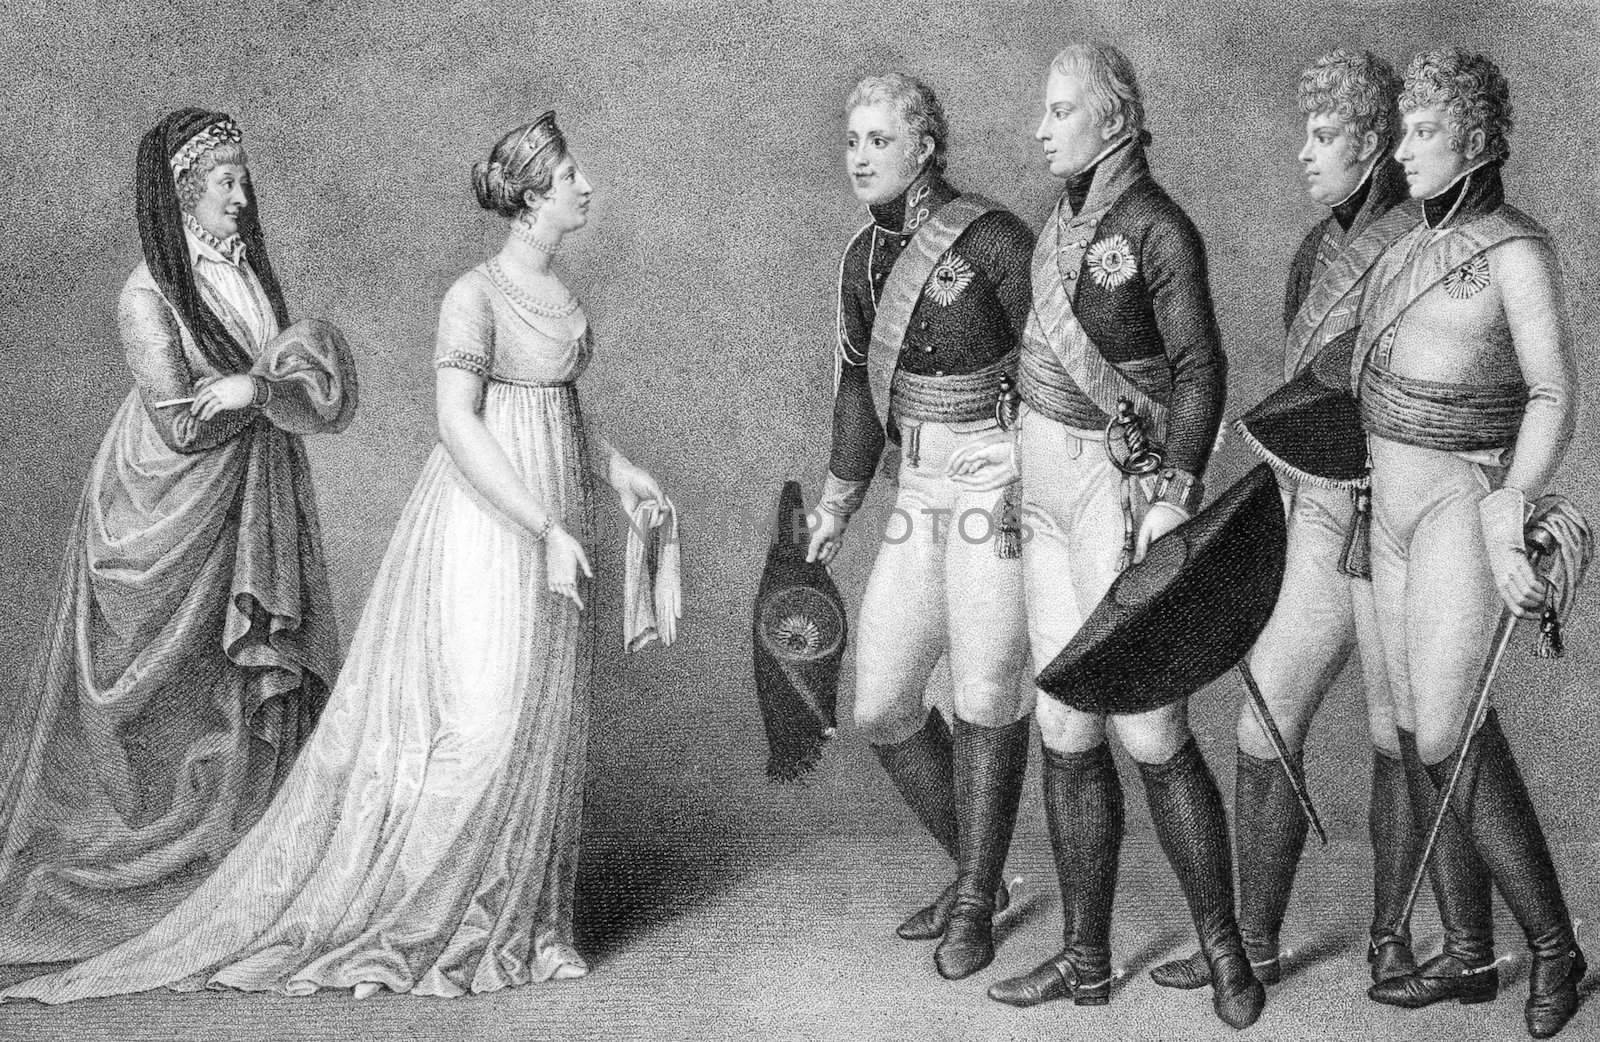 Frederick William and Louisa of Prussia romance scene on engraving from the 1800s.